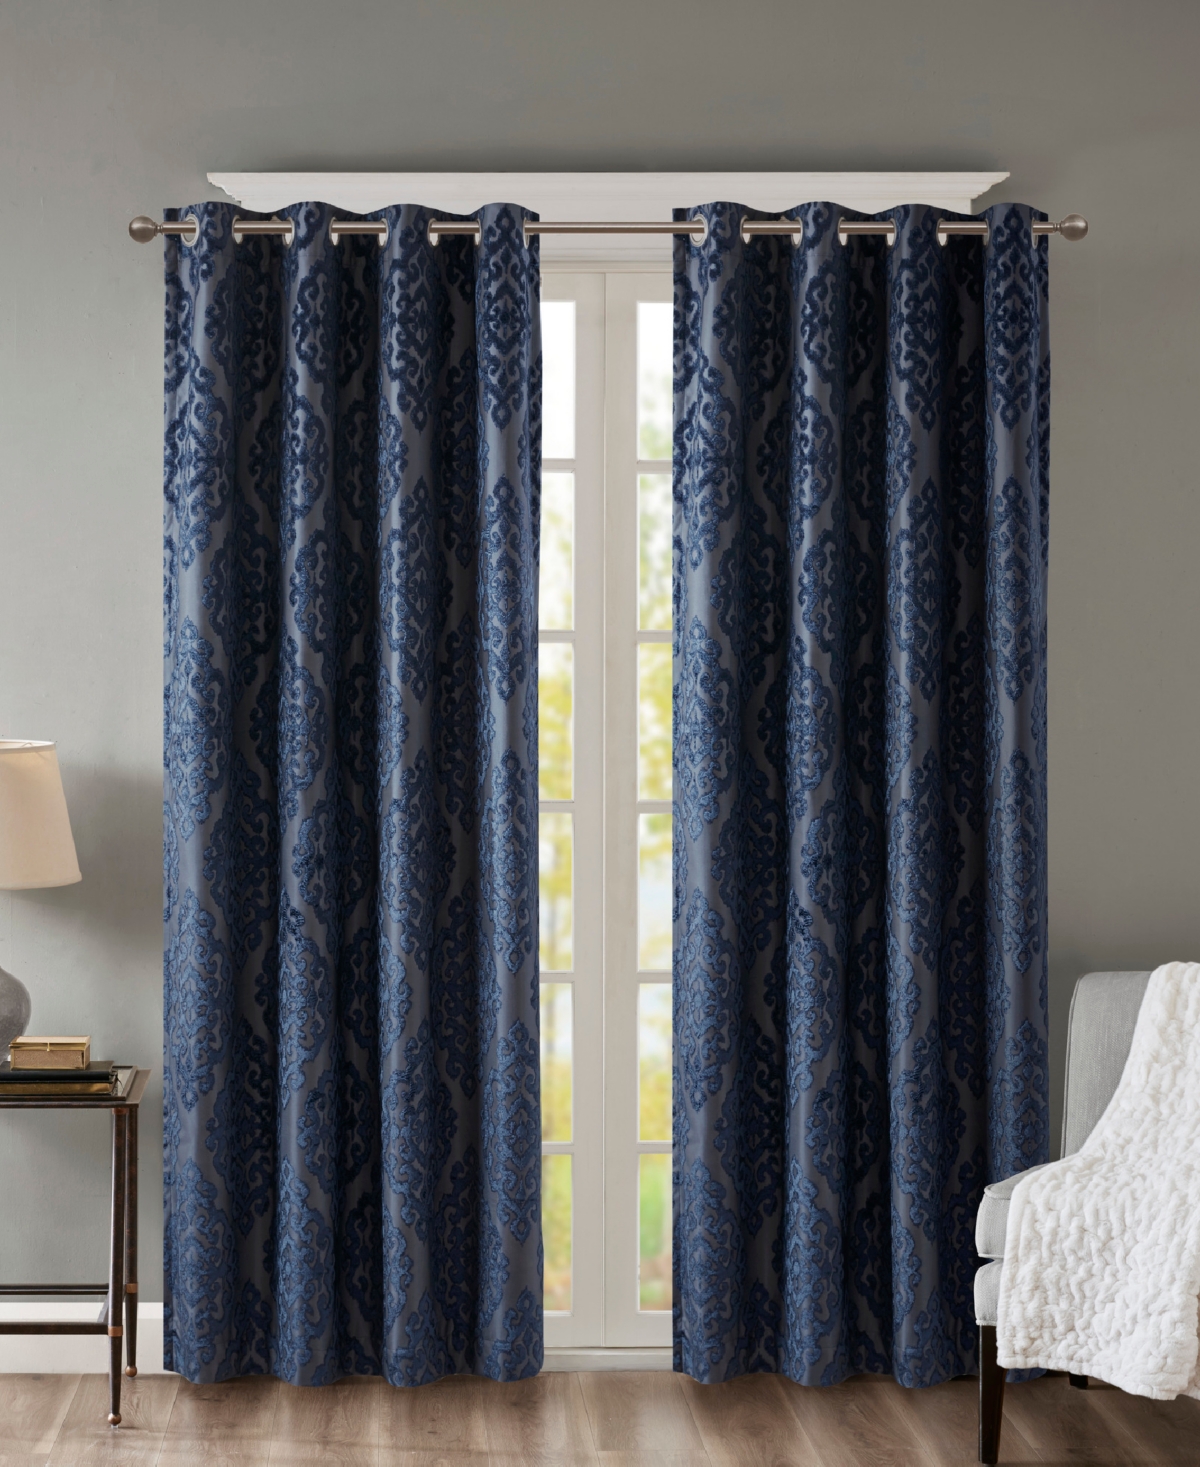 Mirage Knitted Jacquard Damask Total Blackout Grommet Top Curtain Panel, 50"W x 95"L - Charcoal